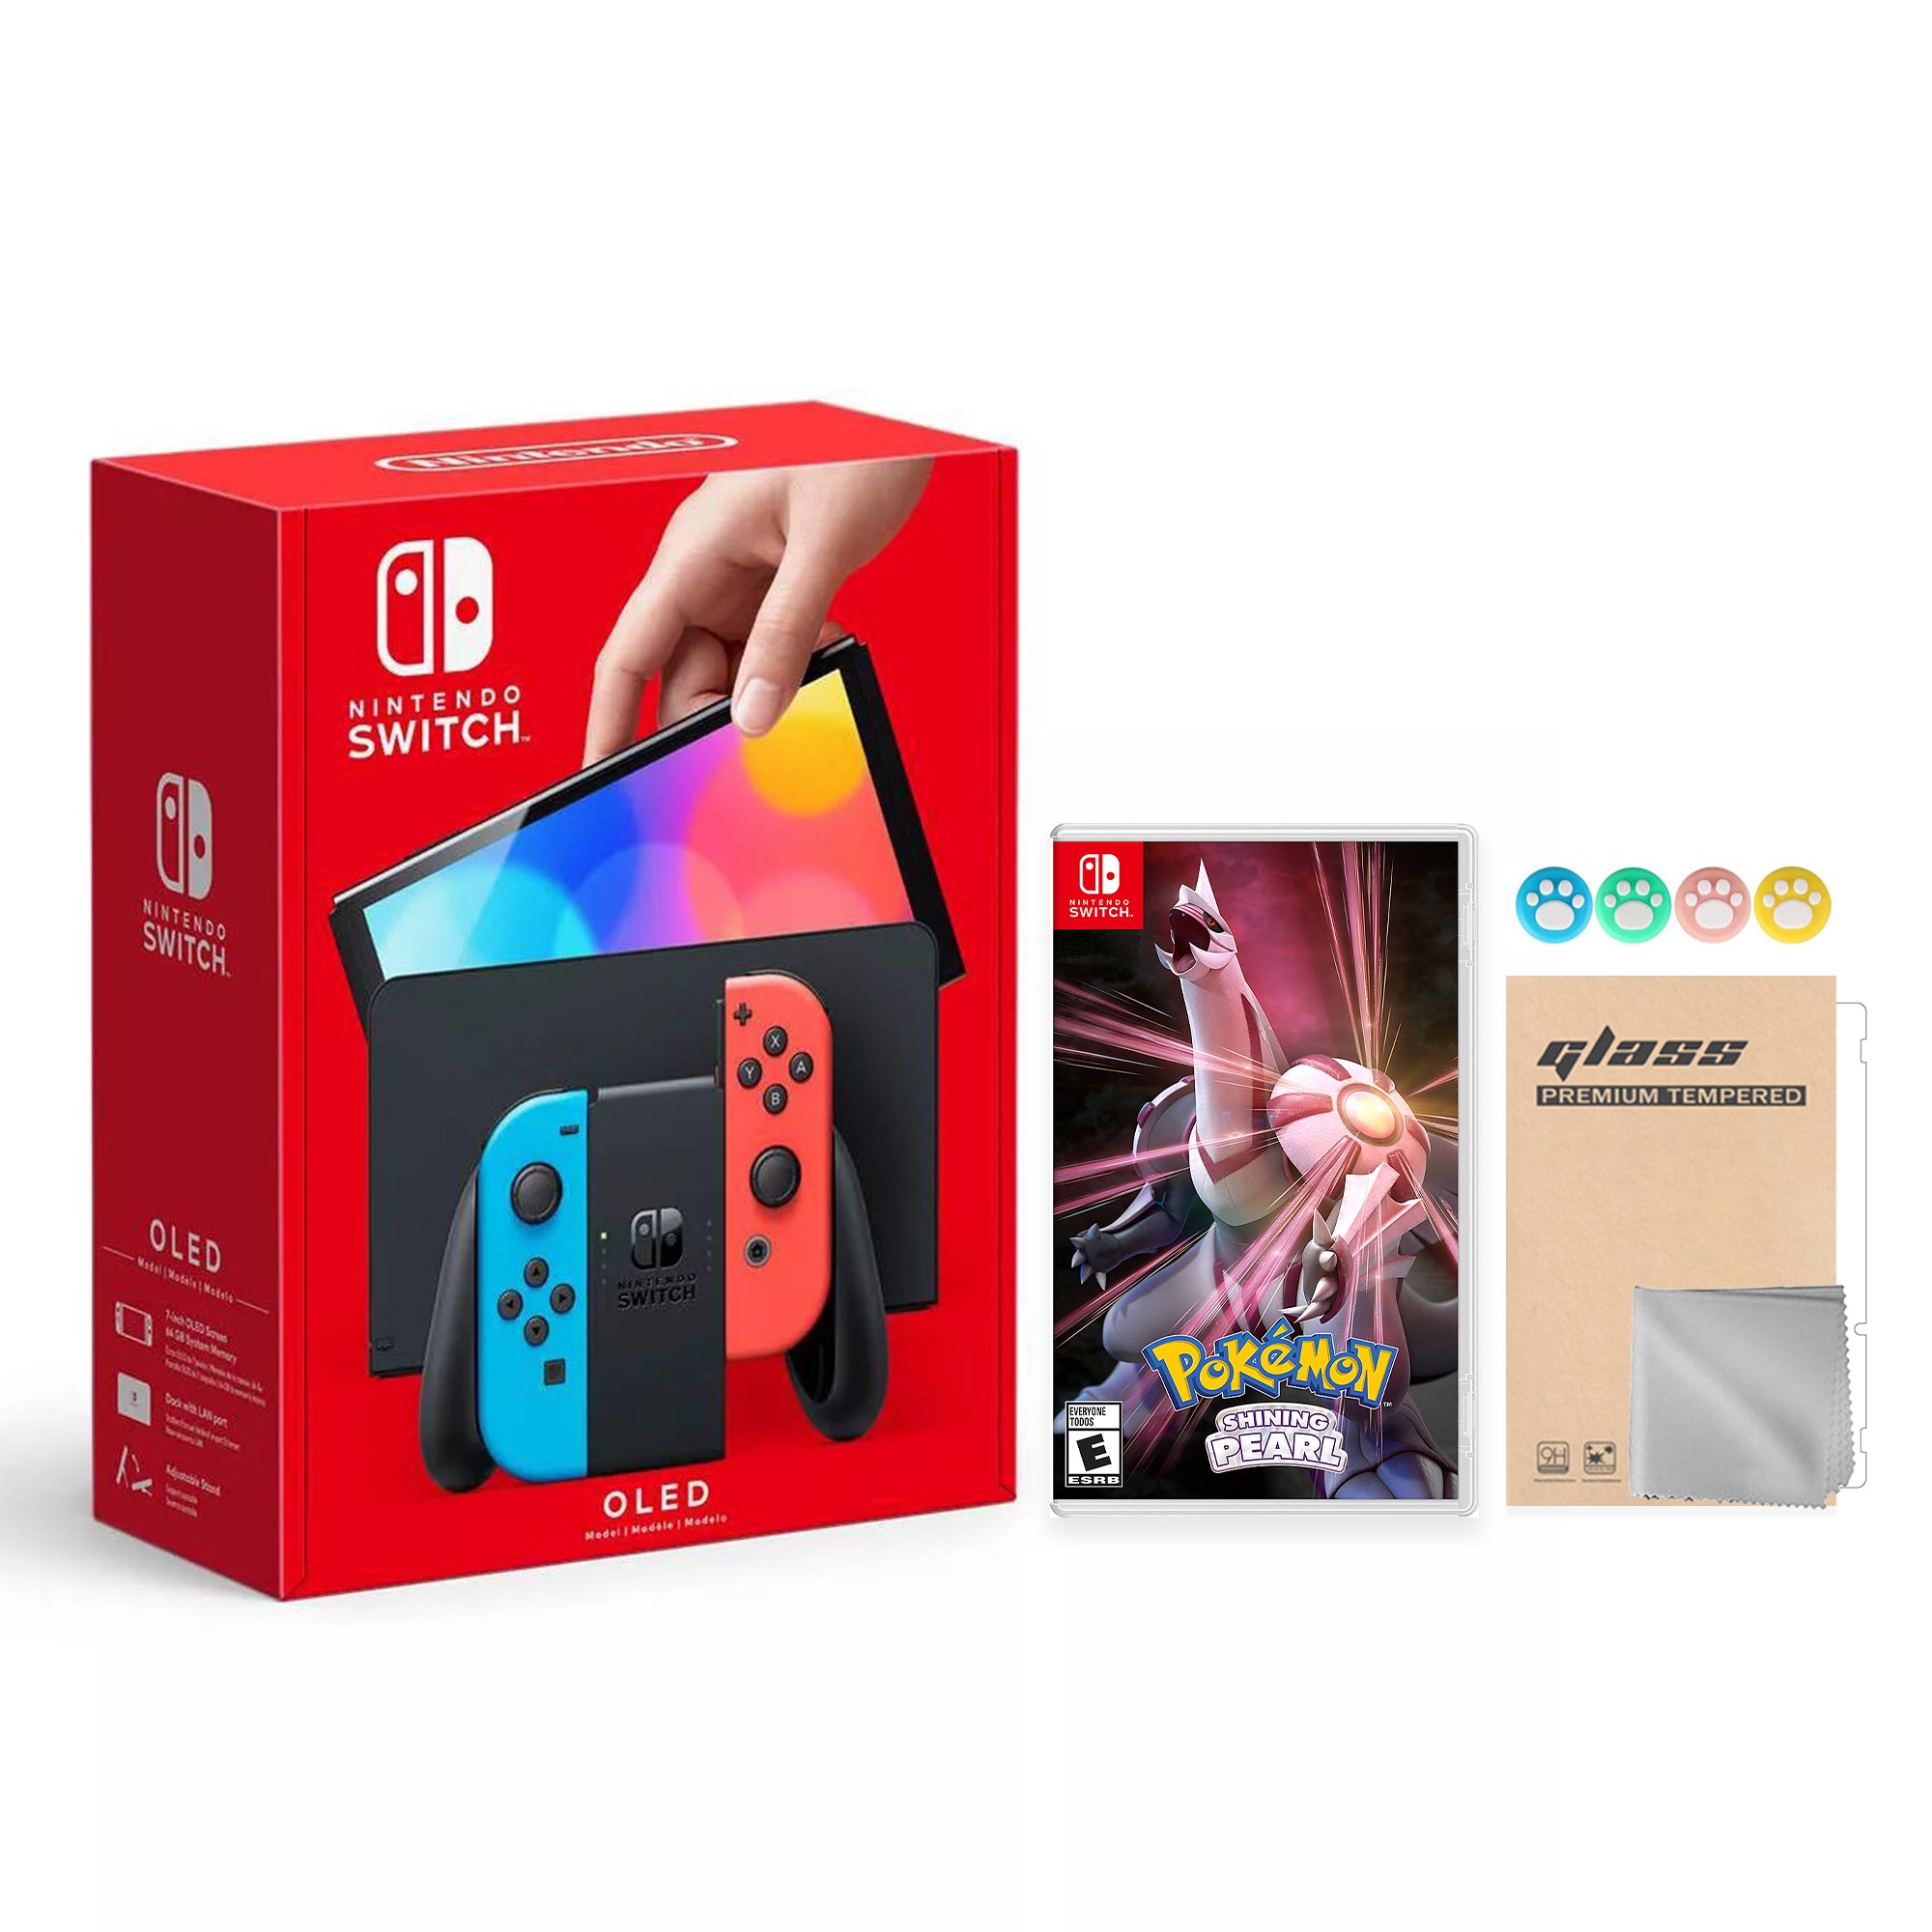 2022 New Nintendo Switch OLED Model Neon Red Blue Joy Con 64GB Console Improved HD Screen & LAN-Port Dock with Pokemon Shining Pearl, Mytrix Joystick Caps & Screen Protector